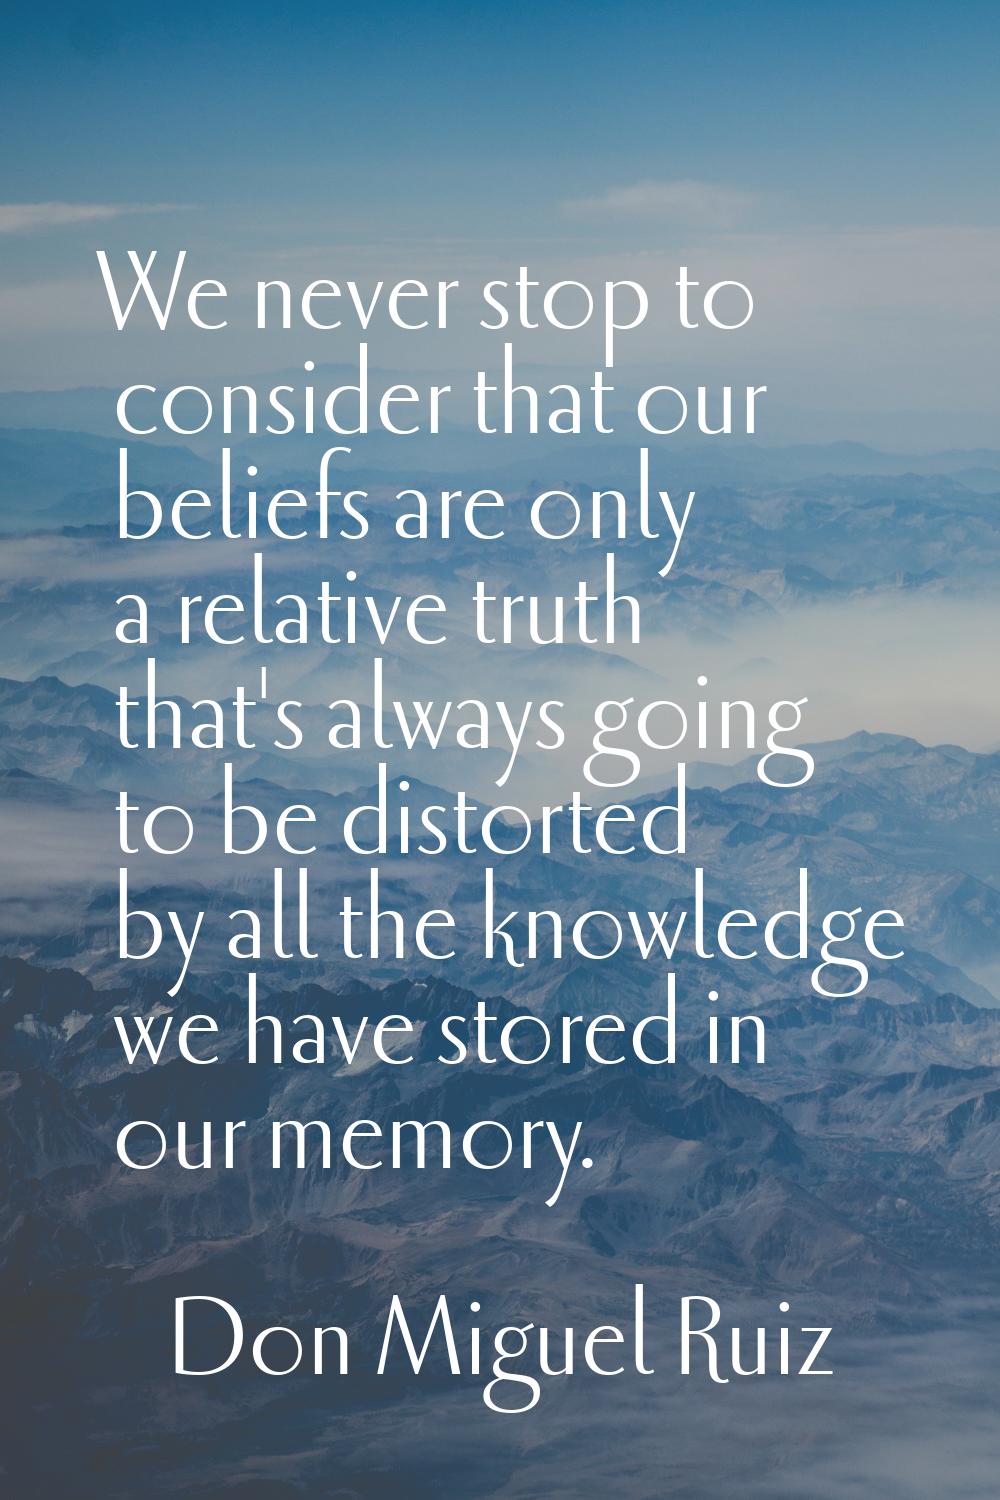 We never stop to consider that our beliefs are only a relative truth that's always going to be dist